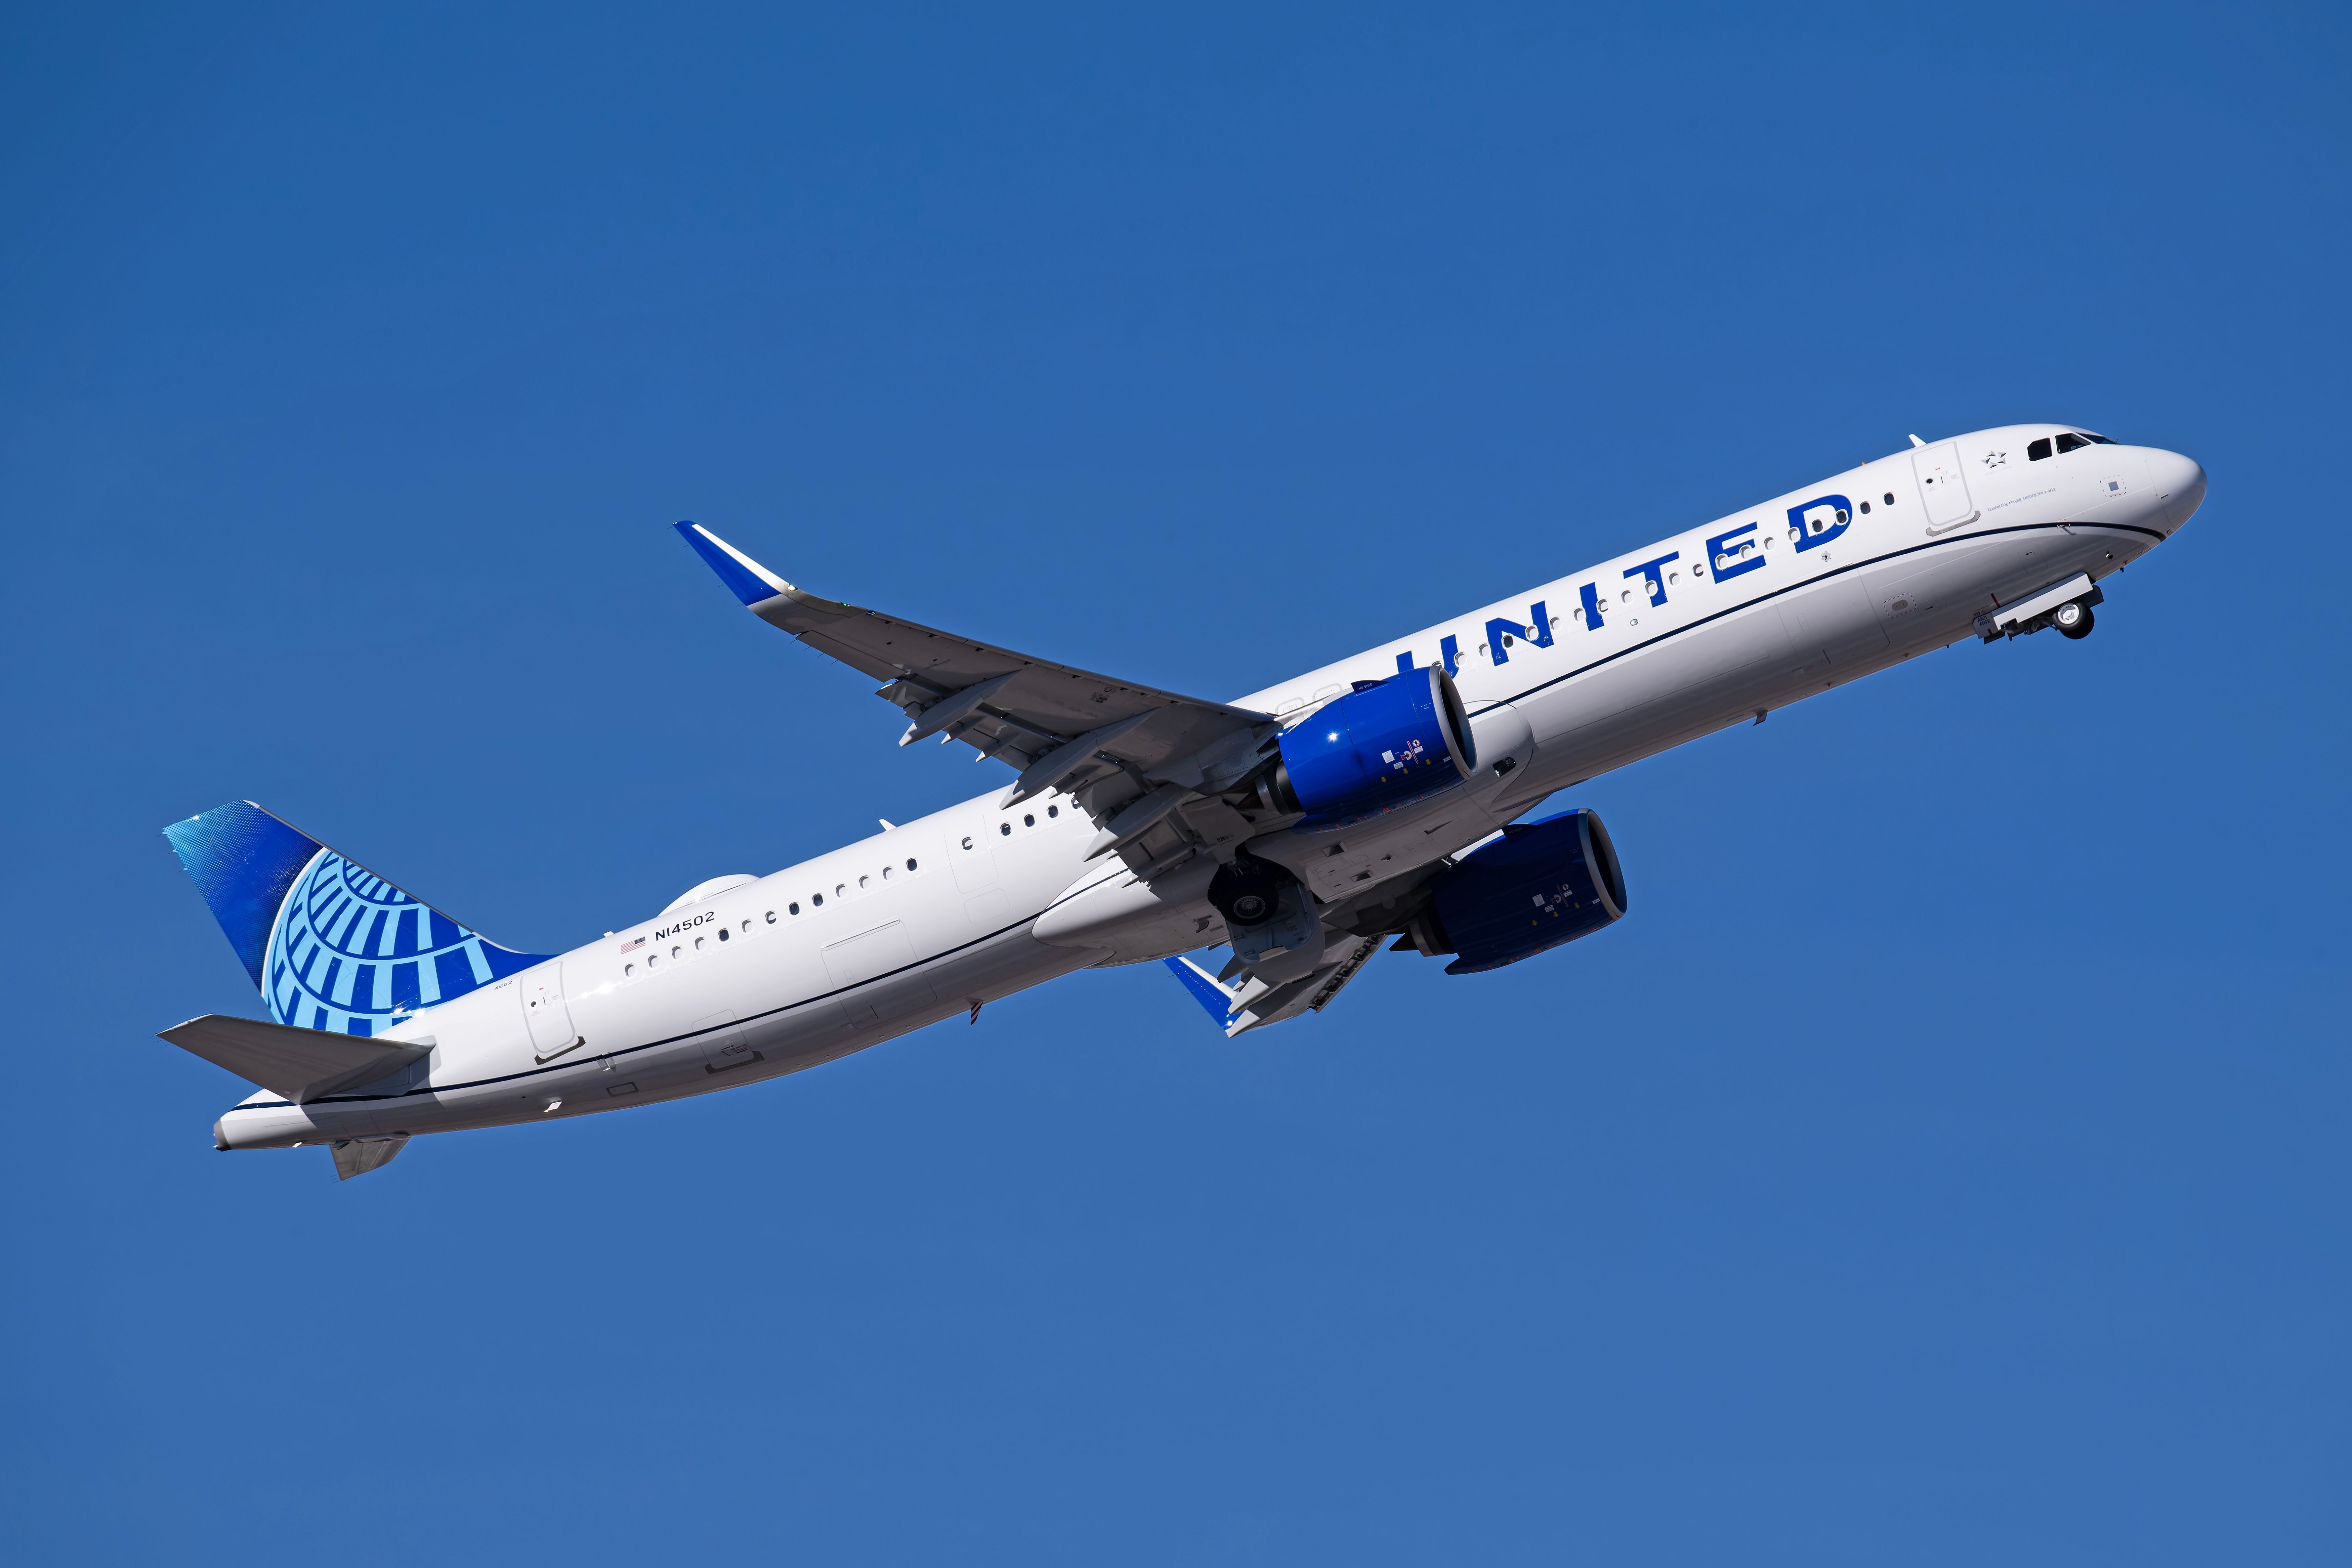 United Airlines Airbus A321neo taking off.